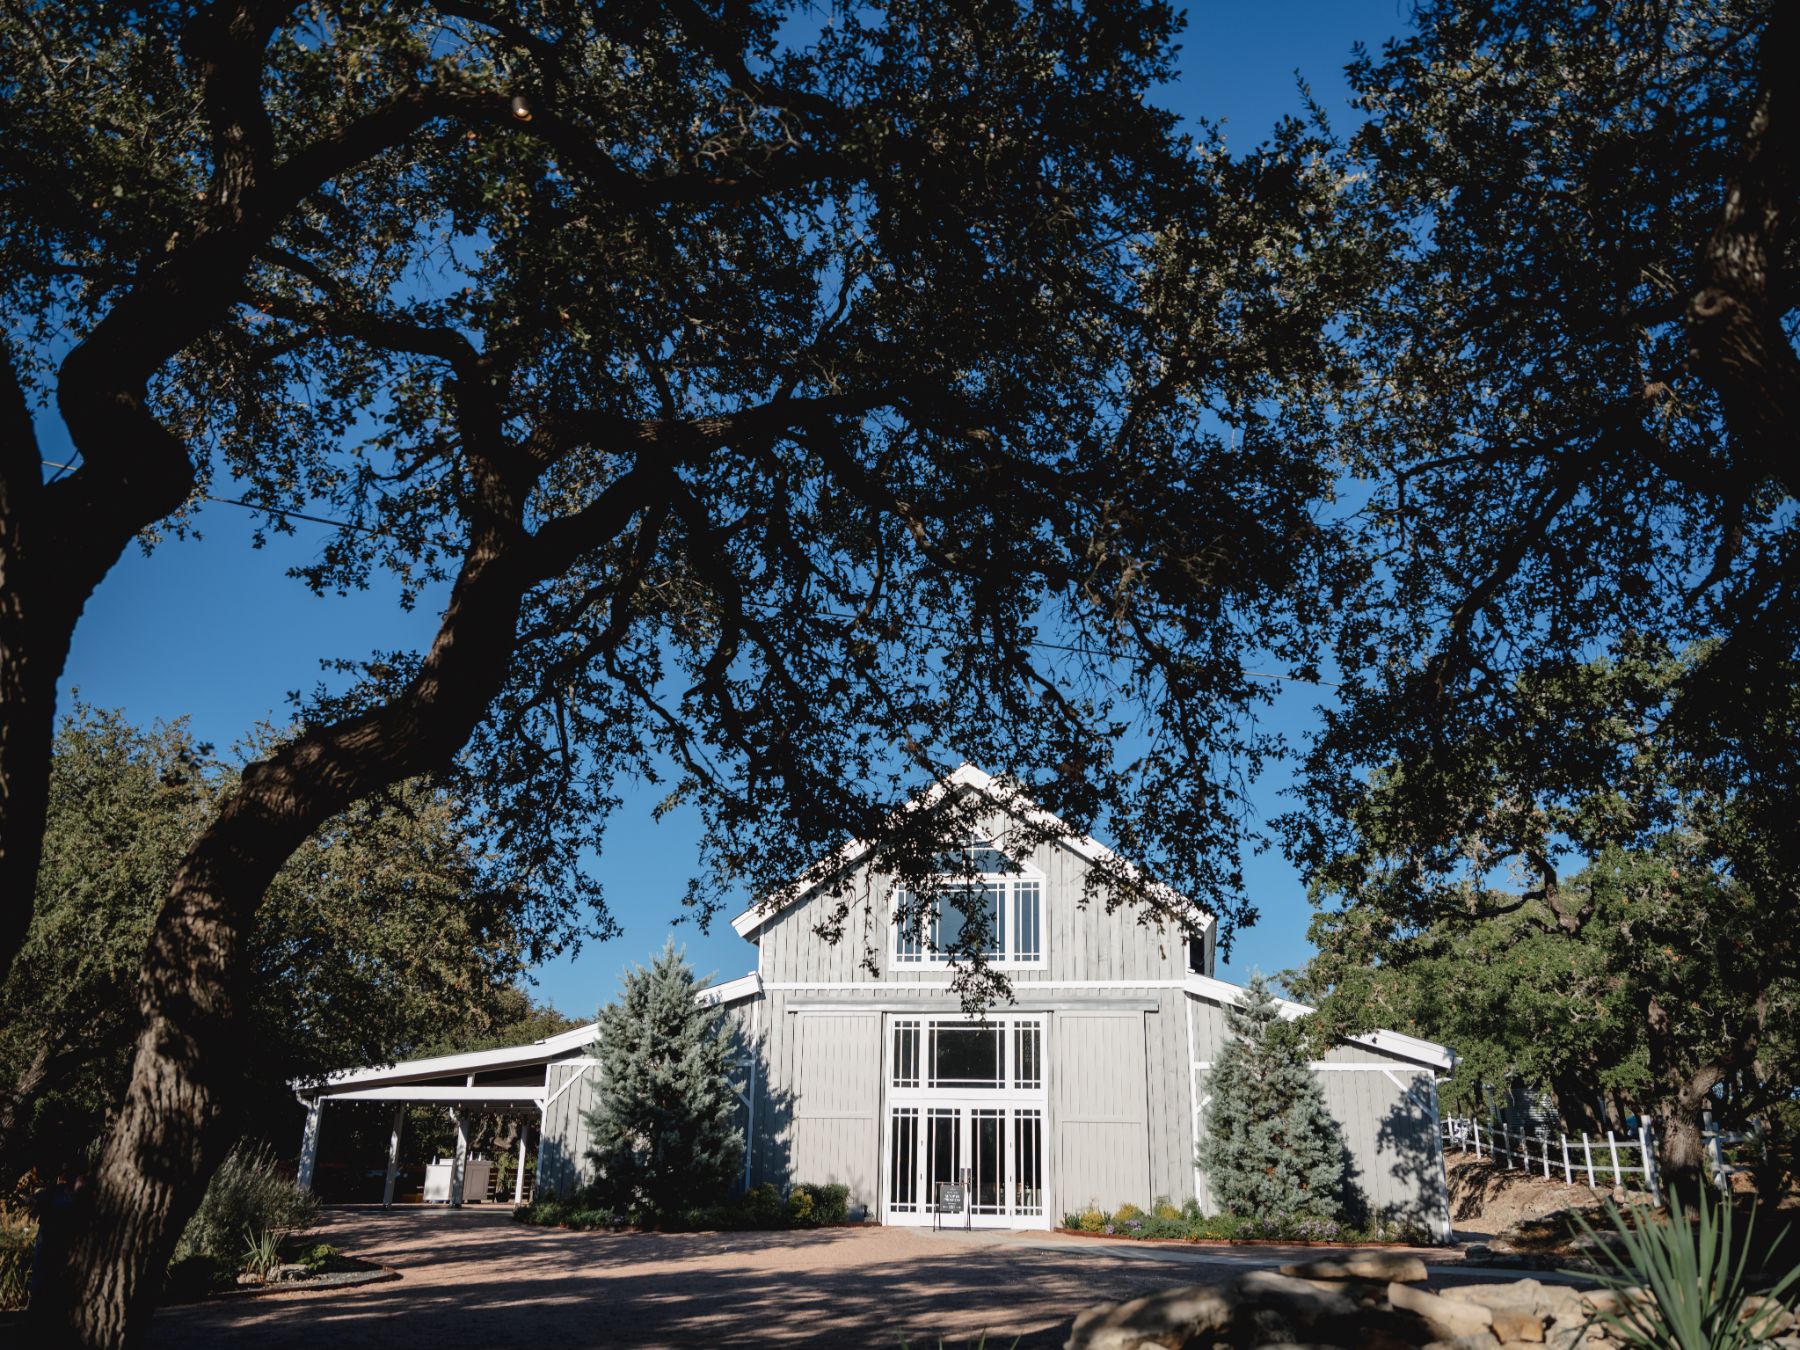 Large oak trees, and a blue sky frame, the gray barn of the Addison Grove wedding venue in Austin Texas.